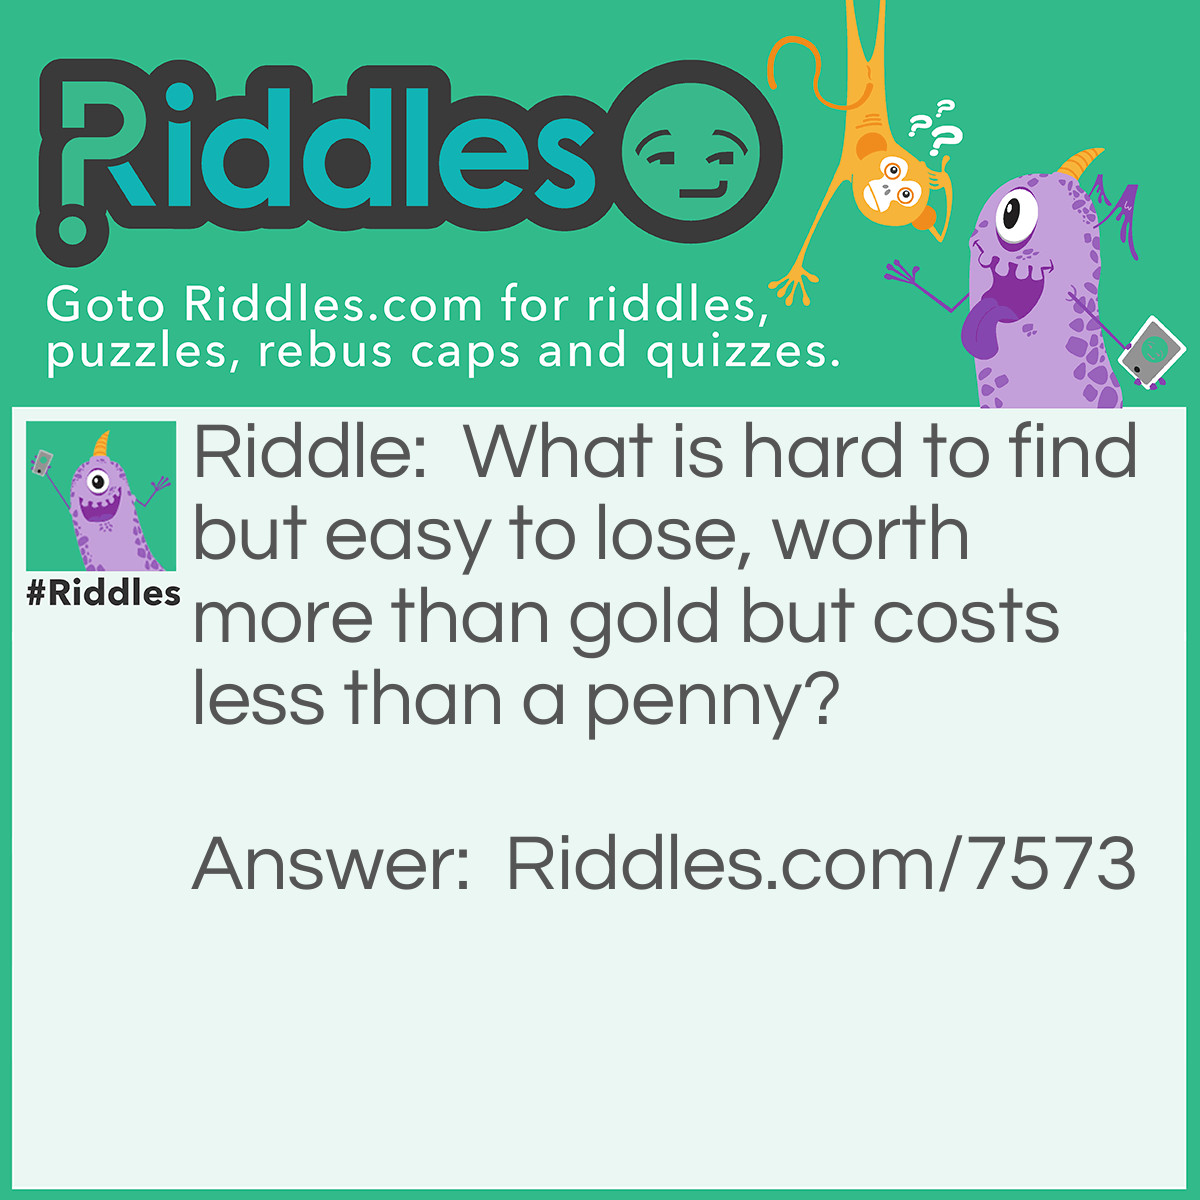 Riddle: What is hard to find but <a href="/easy-riddles">easy</a> to lose, worth more than gold but costs less than a penny? Answer: A Friend.